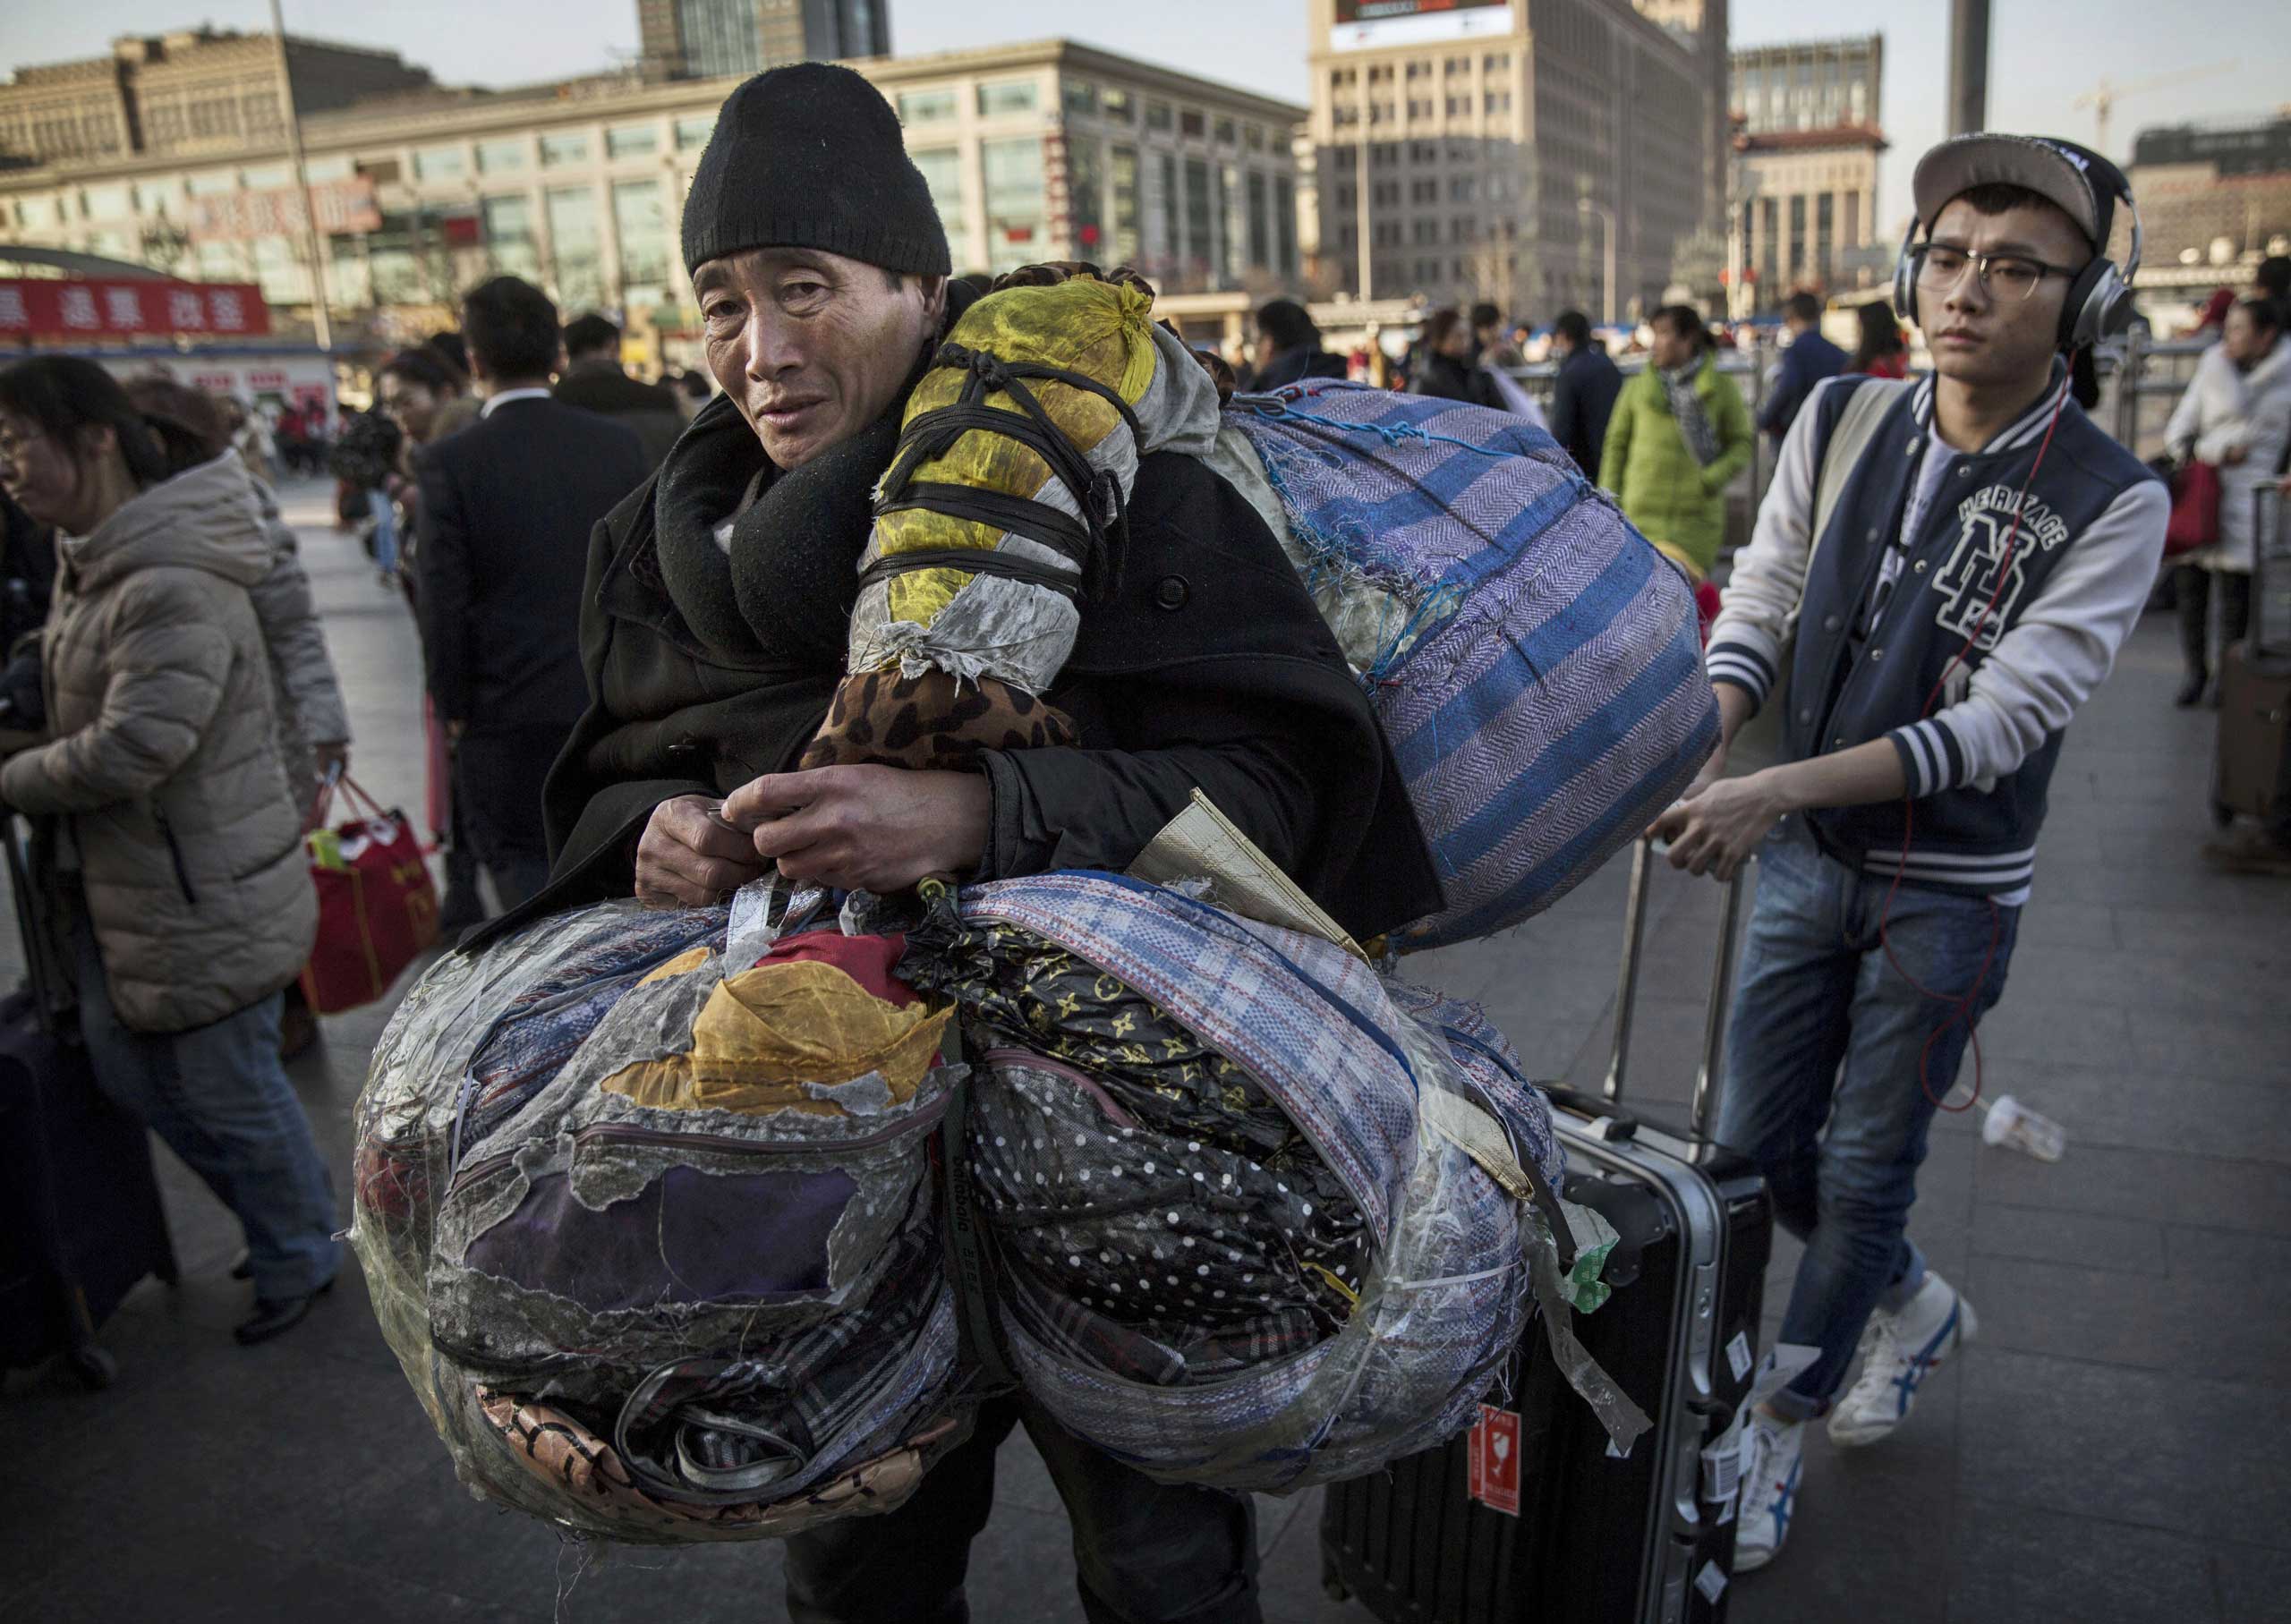 Men wait in line with their belongings as they enter a railway station during the Spring Festival on Feb. 17, 2015 in Beijing.